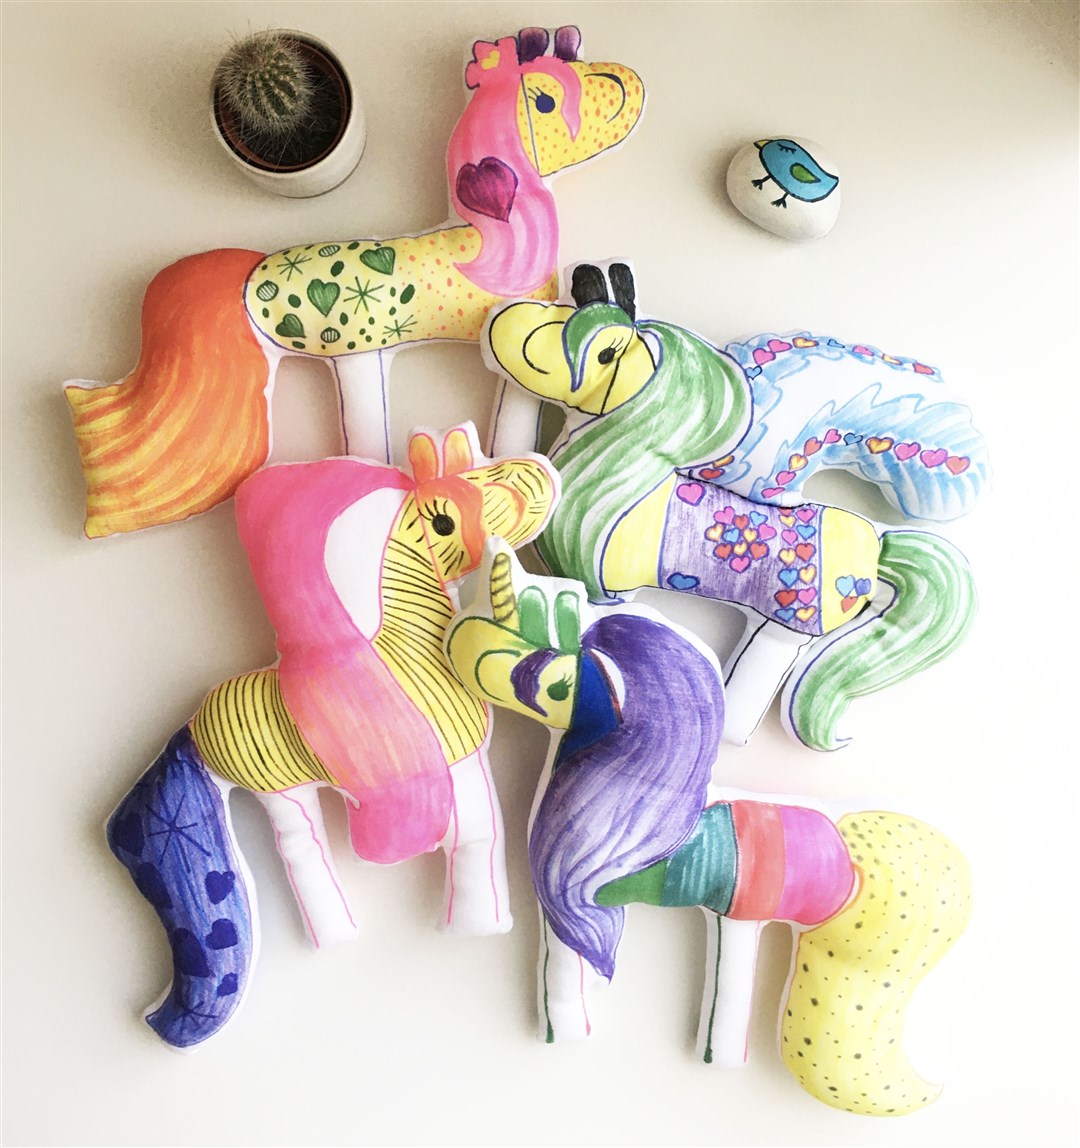 Horse toys created from drawings of horses designed by Lilia (Lilia’s Smiling Horses)